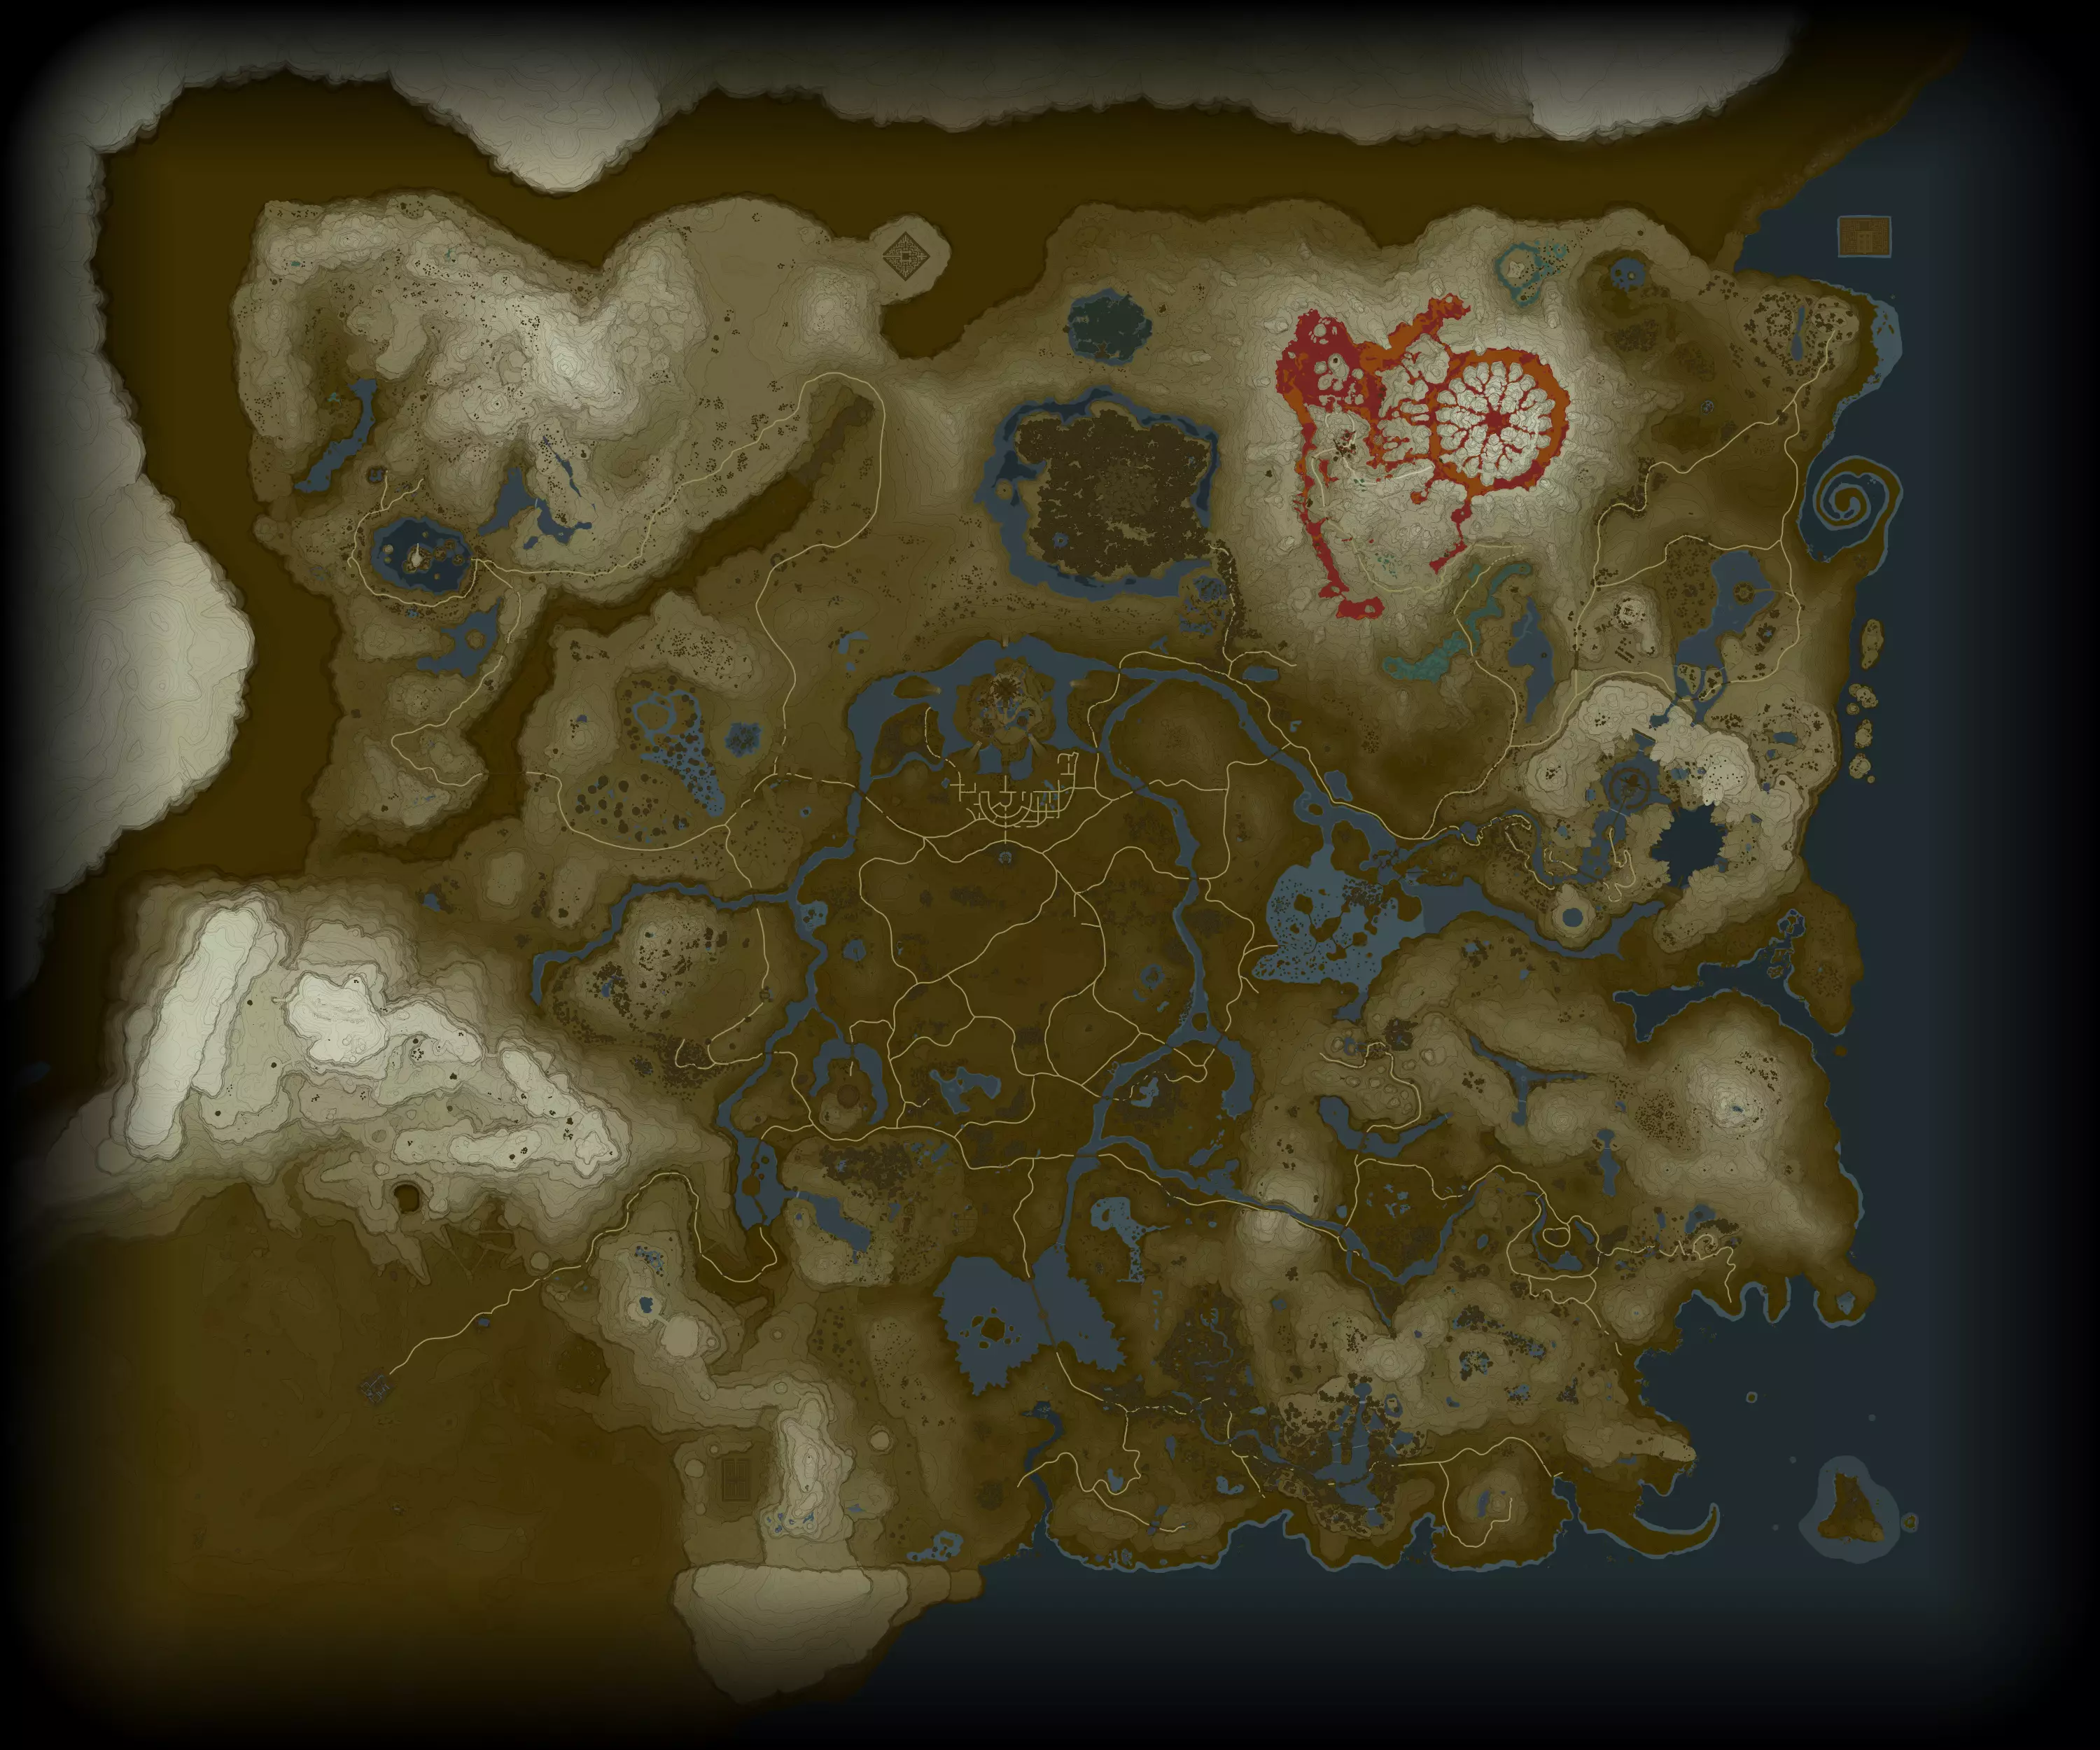 Breath of the Wild's map, free of markers /